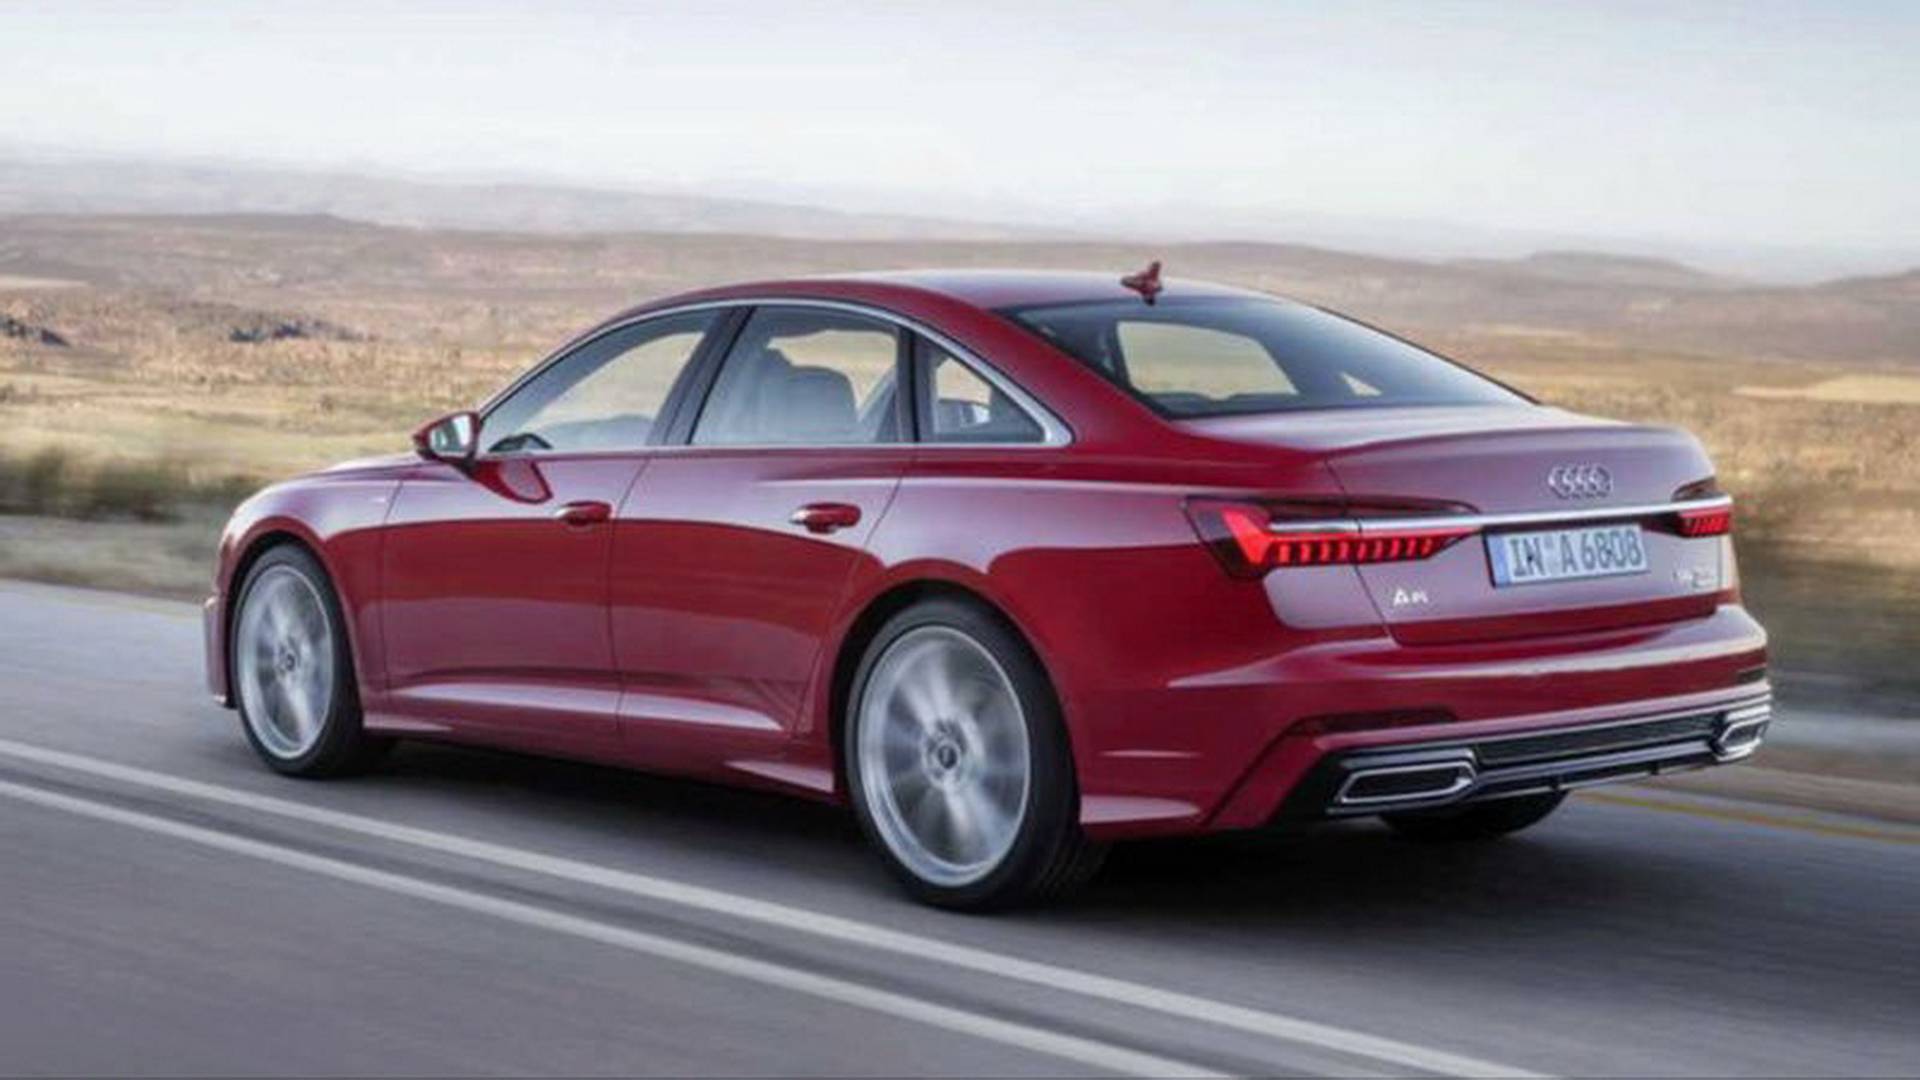 Audi A6 Leaks Out In Alleged Official Image